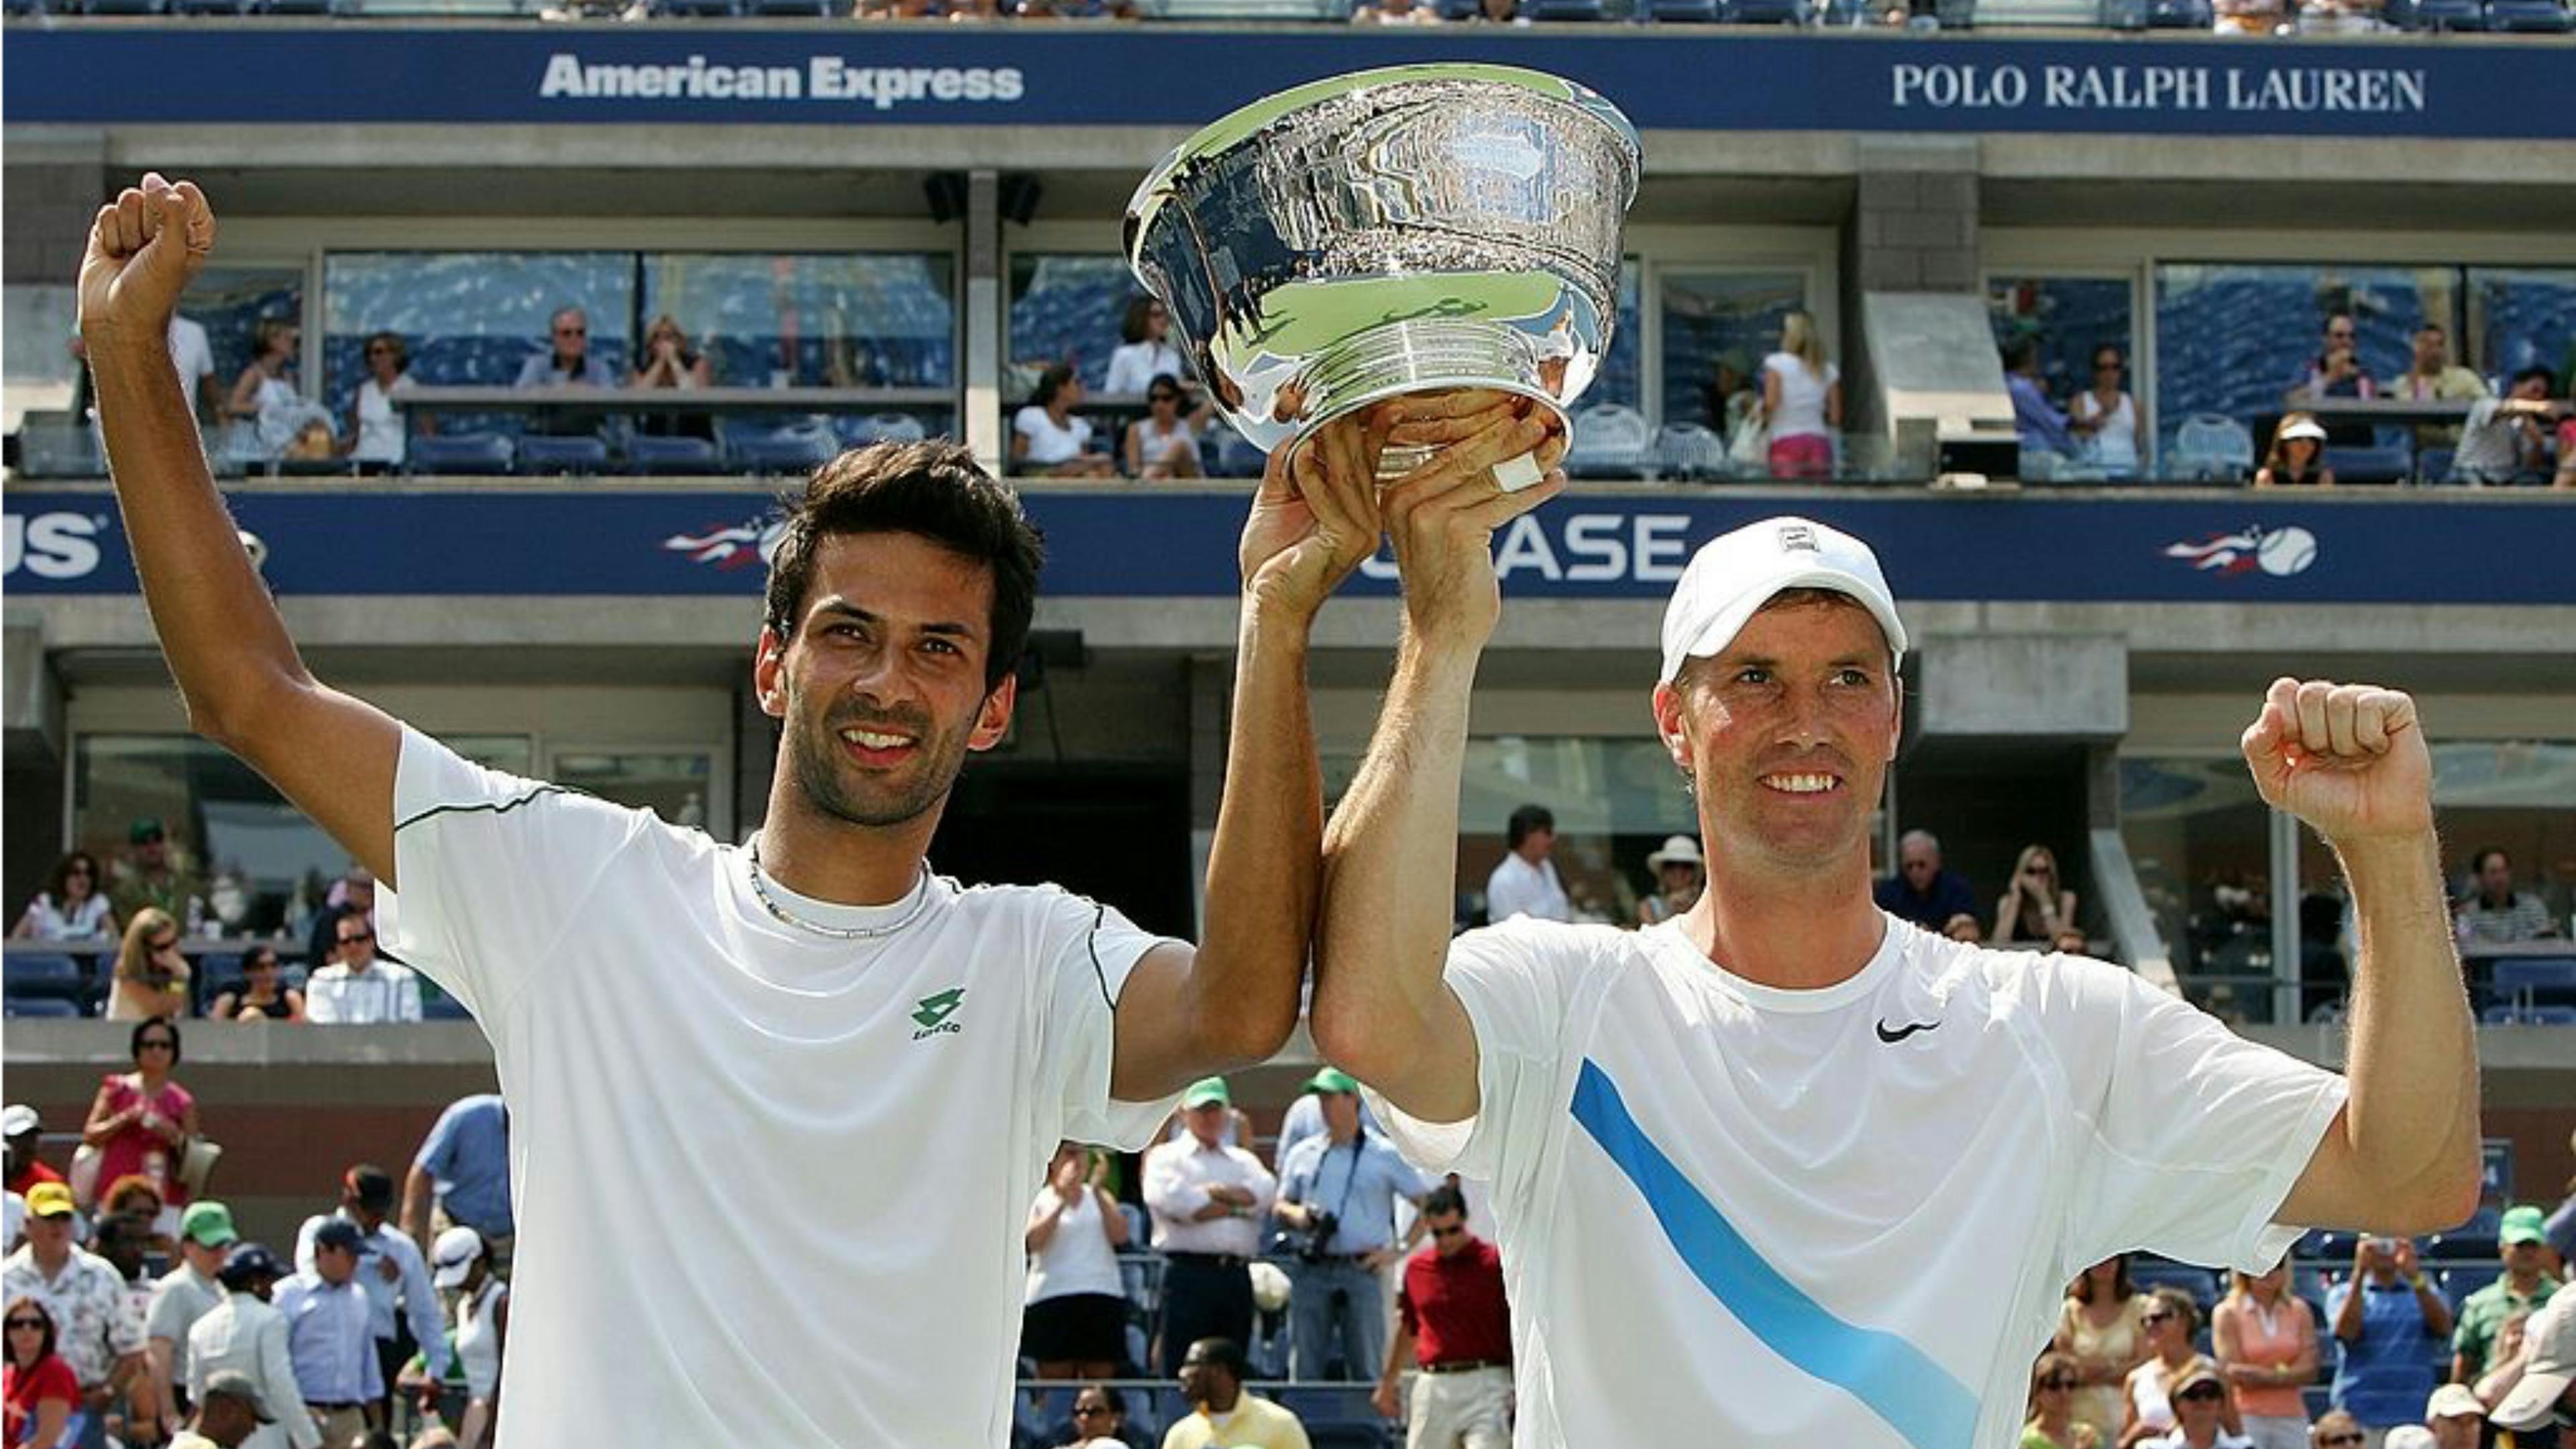 Exklusive Tennis-Experience mit US-Open Sieger Julian Knowle